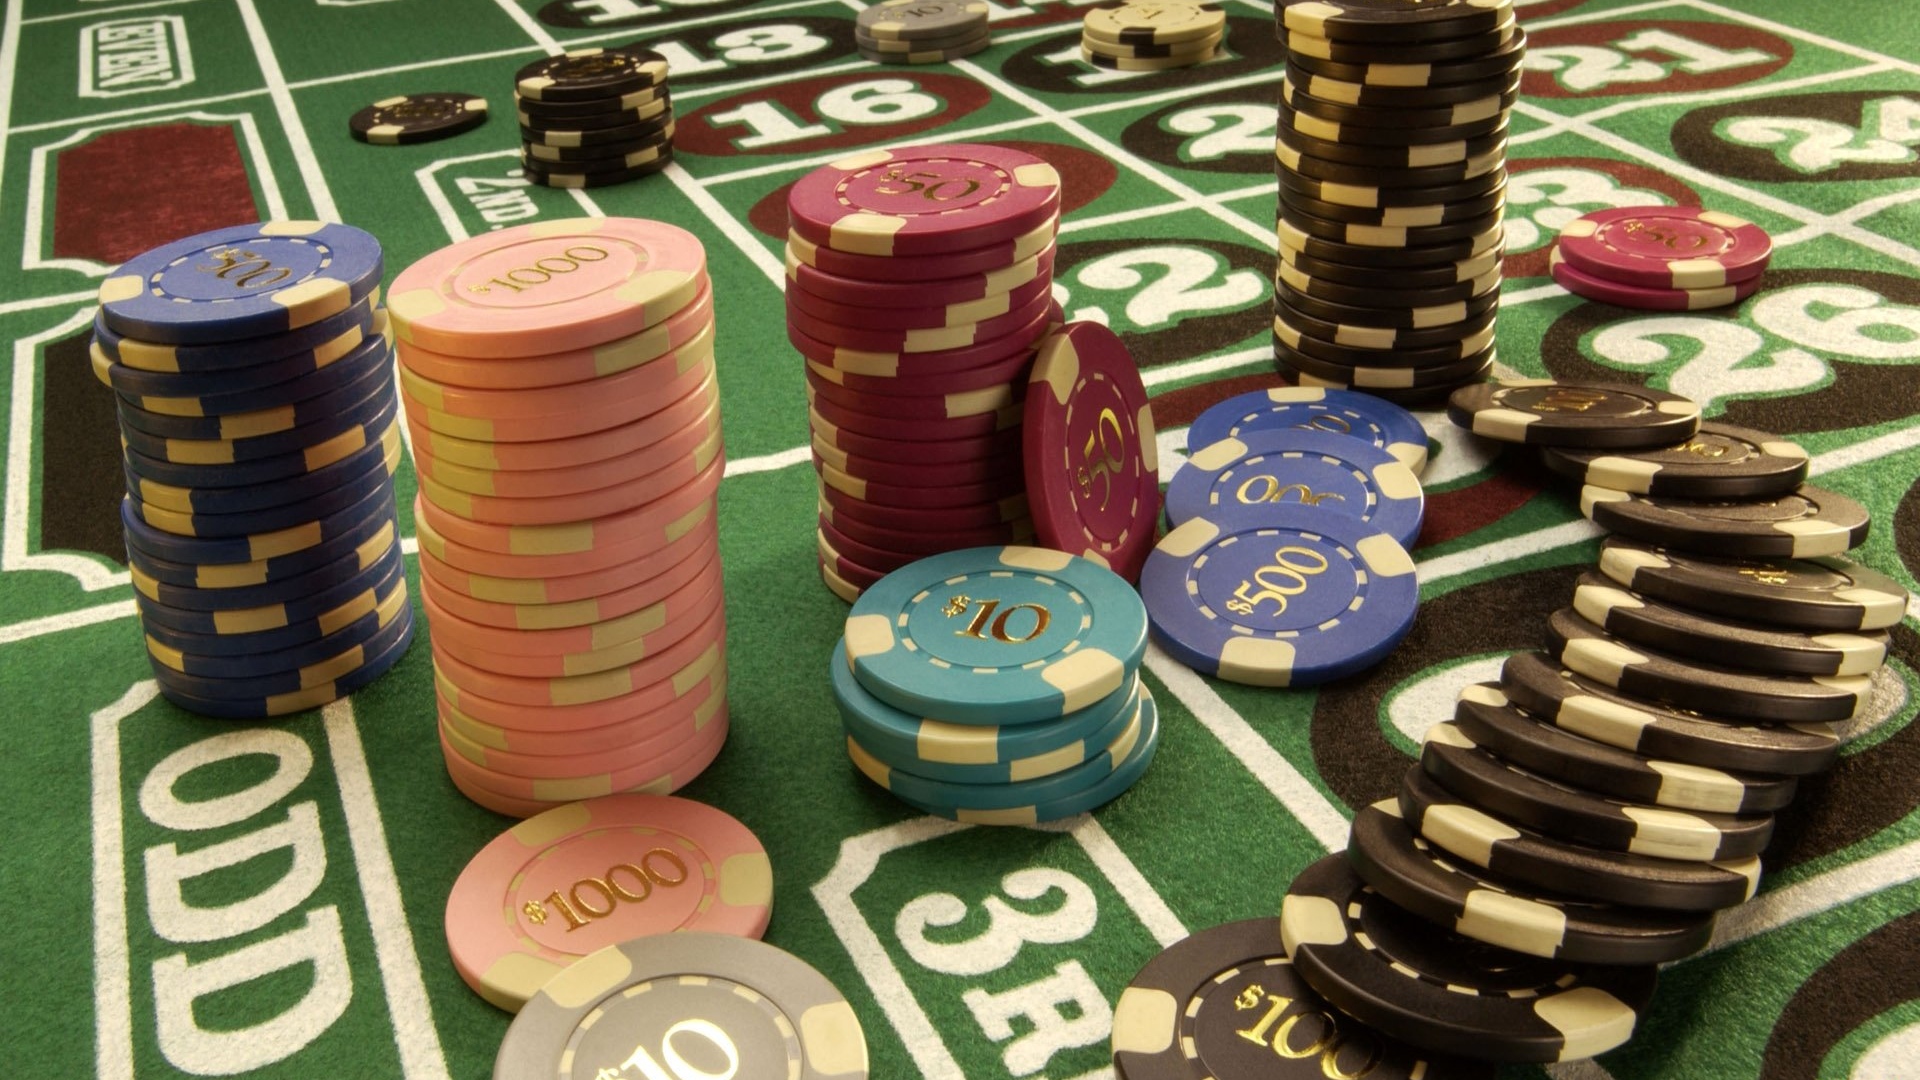 Getting to know about the game variations on online gambling